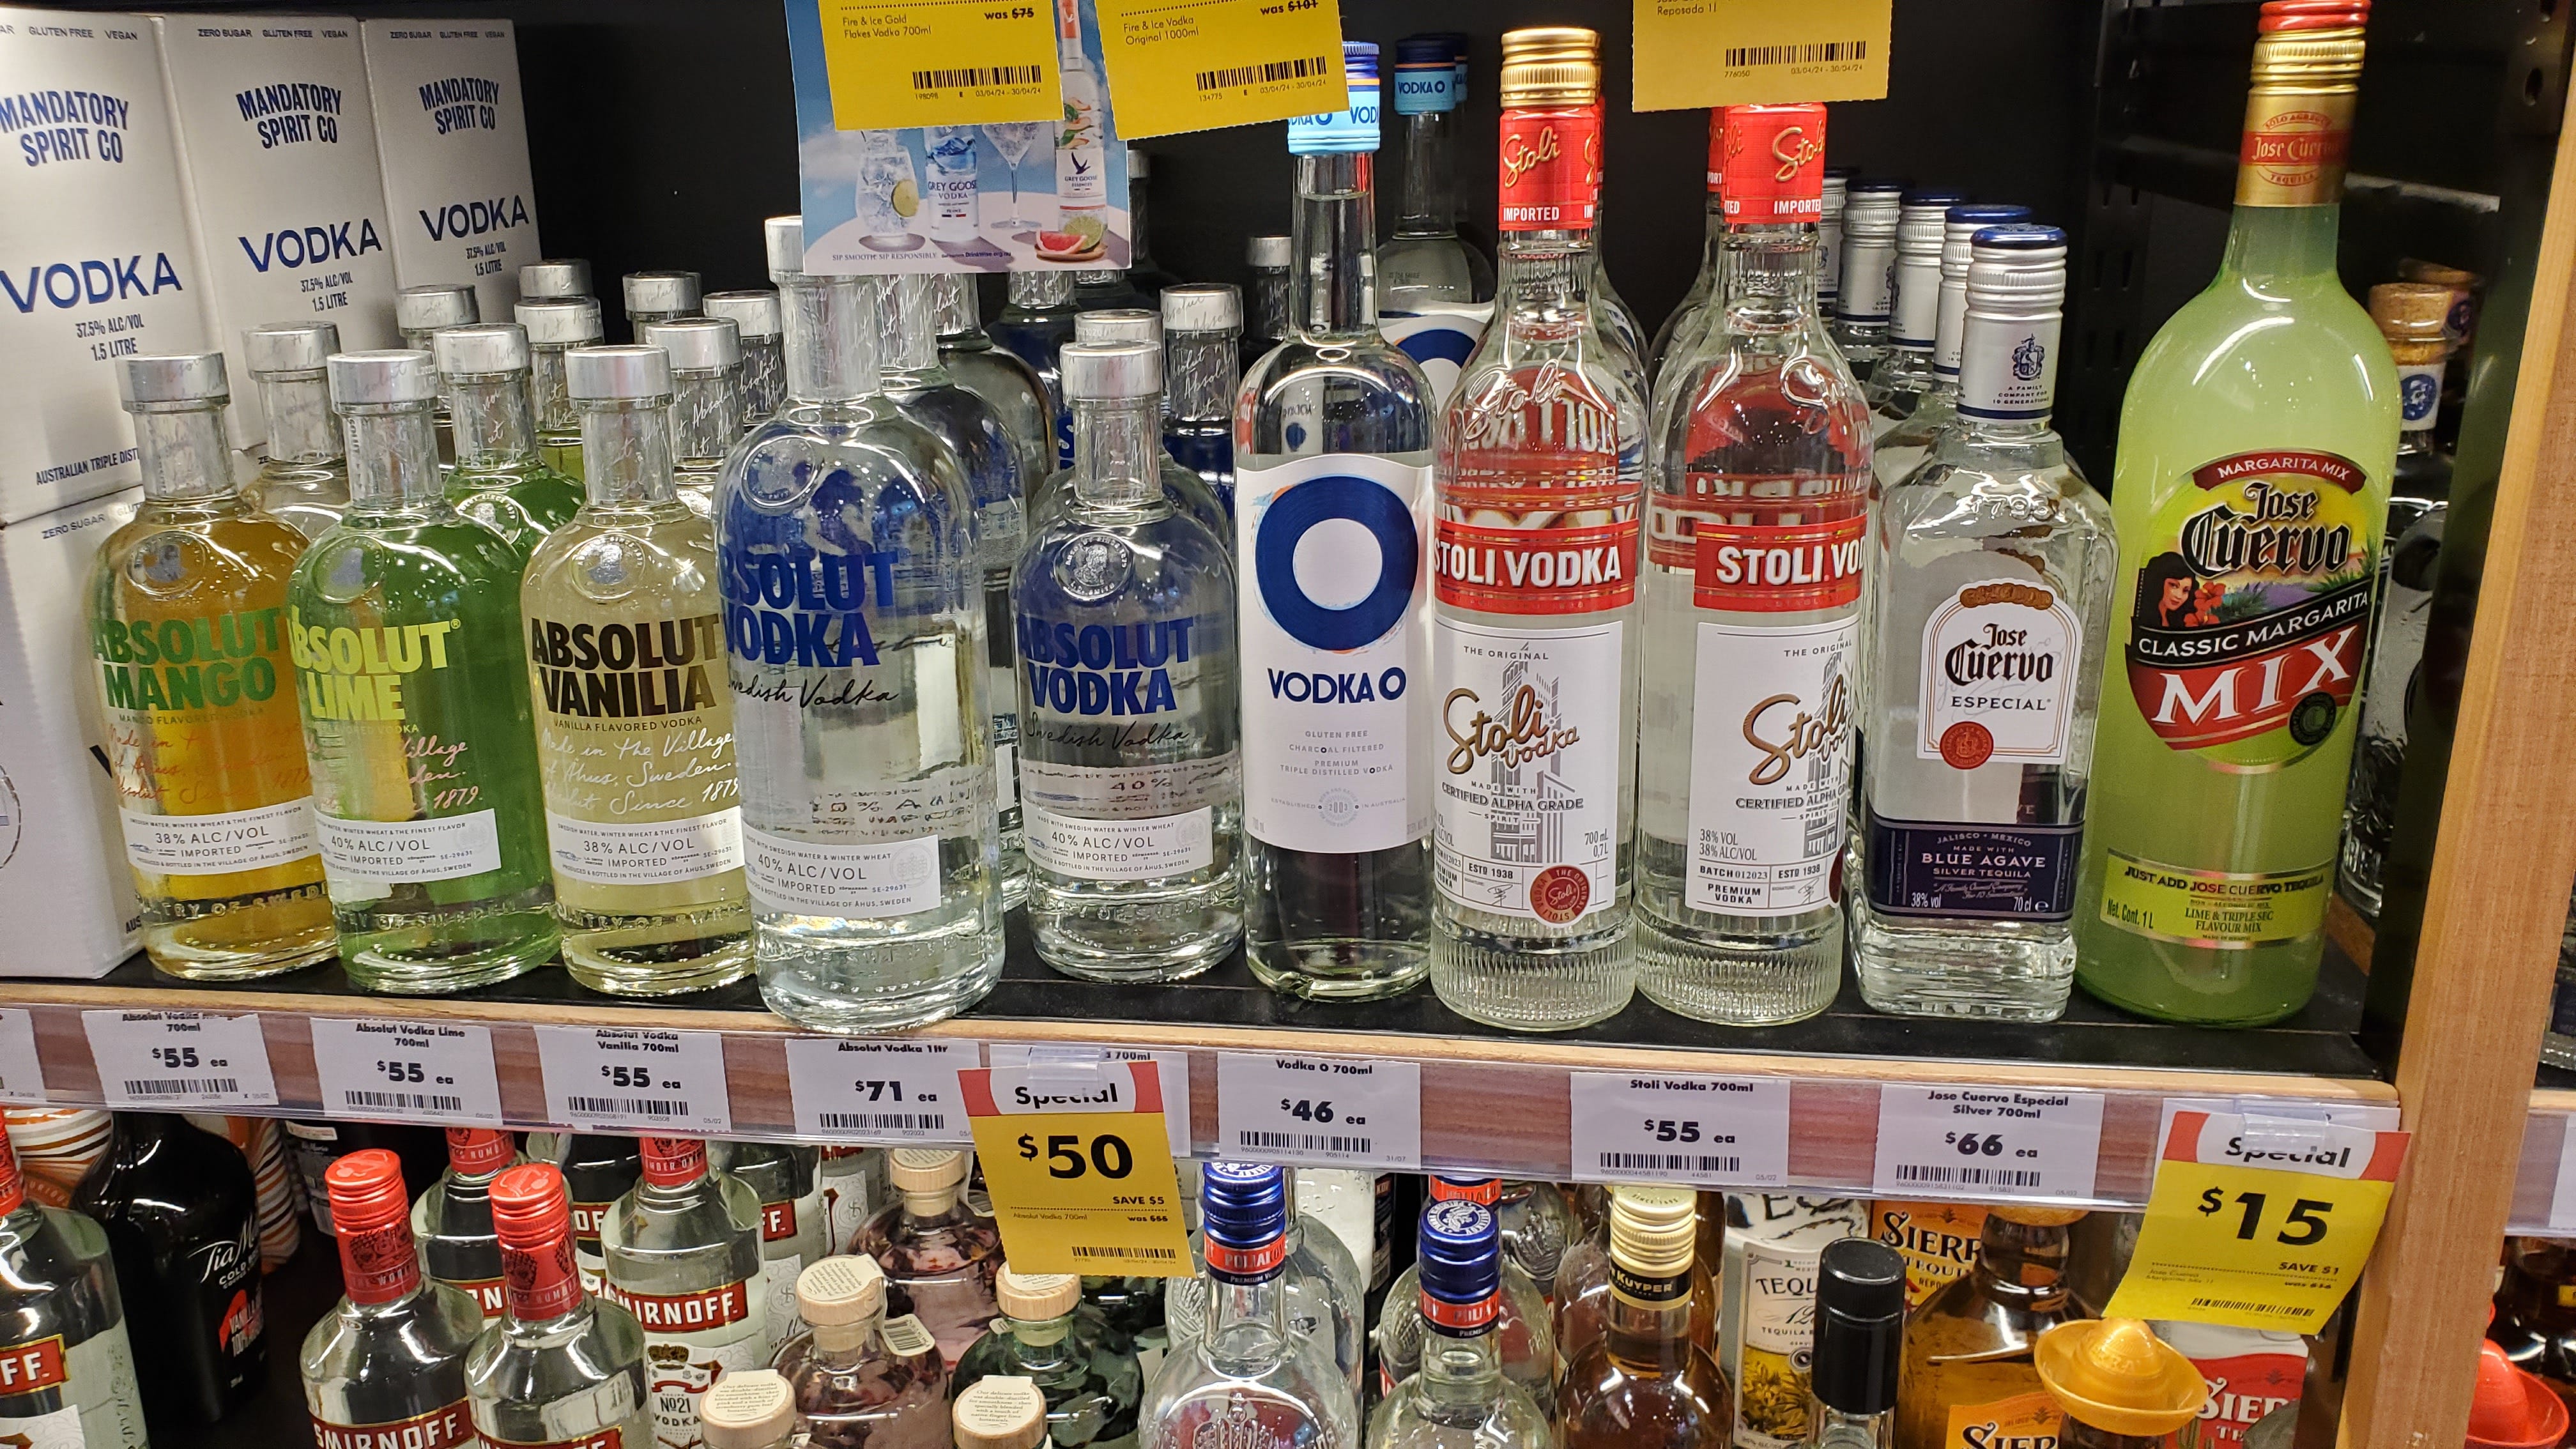 <p>Australia has some of the <a href="https://www.theguardian.com/news/2024/mar/21/australia-alcohol-tax-system-rise-spirits-beer-costs-percentage">highest taxes on spirits in the world</a>. It's quite an isolated country, far from the places it imports a lot of its alcoholic products from, and you see that reflected in the prices. </p><p>Plus, wine is subject to a <a href="https://www.ato.gov.au/businesses-and-organisations/gst-excise-and-indirect-taxes/wine-equalisation-tax">wine equalization tax (WET</a>) — about 29% of the wine's wholesale value — and may also be subject to the goods and services tax (GST).</p><p>Although choosing a locally brewed beer or homegrown wine is a more cost-effective option, don't be surprised if you see a bottle of spirits that would retail for $20 in the US being sold for triple the price here.</p>